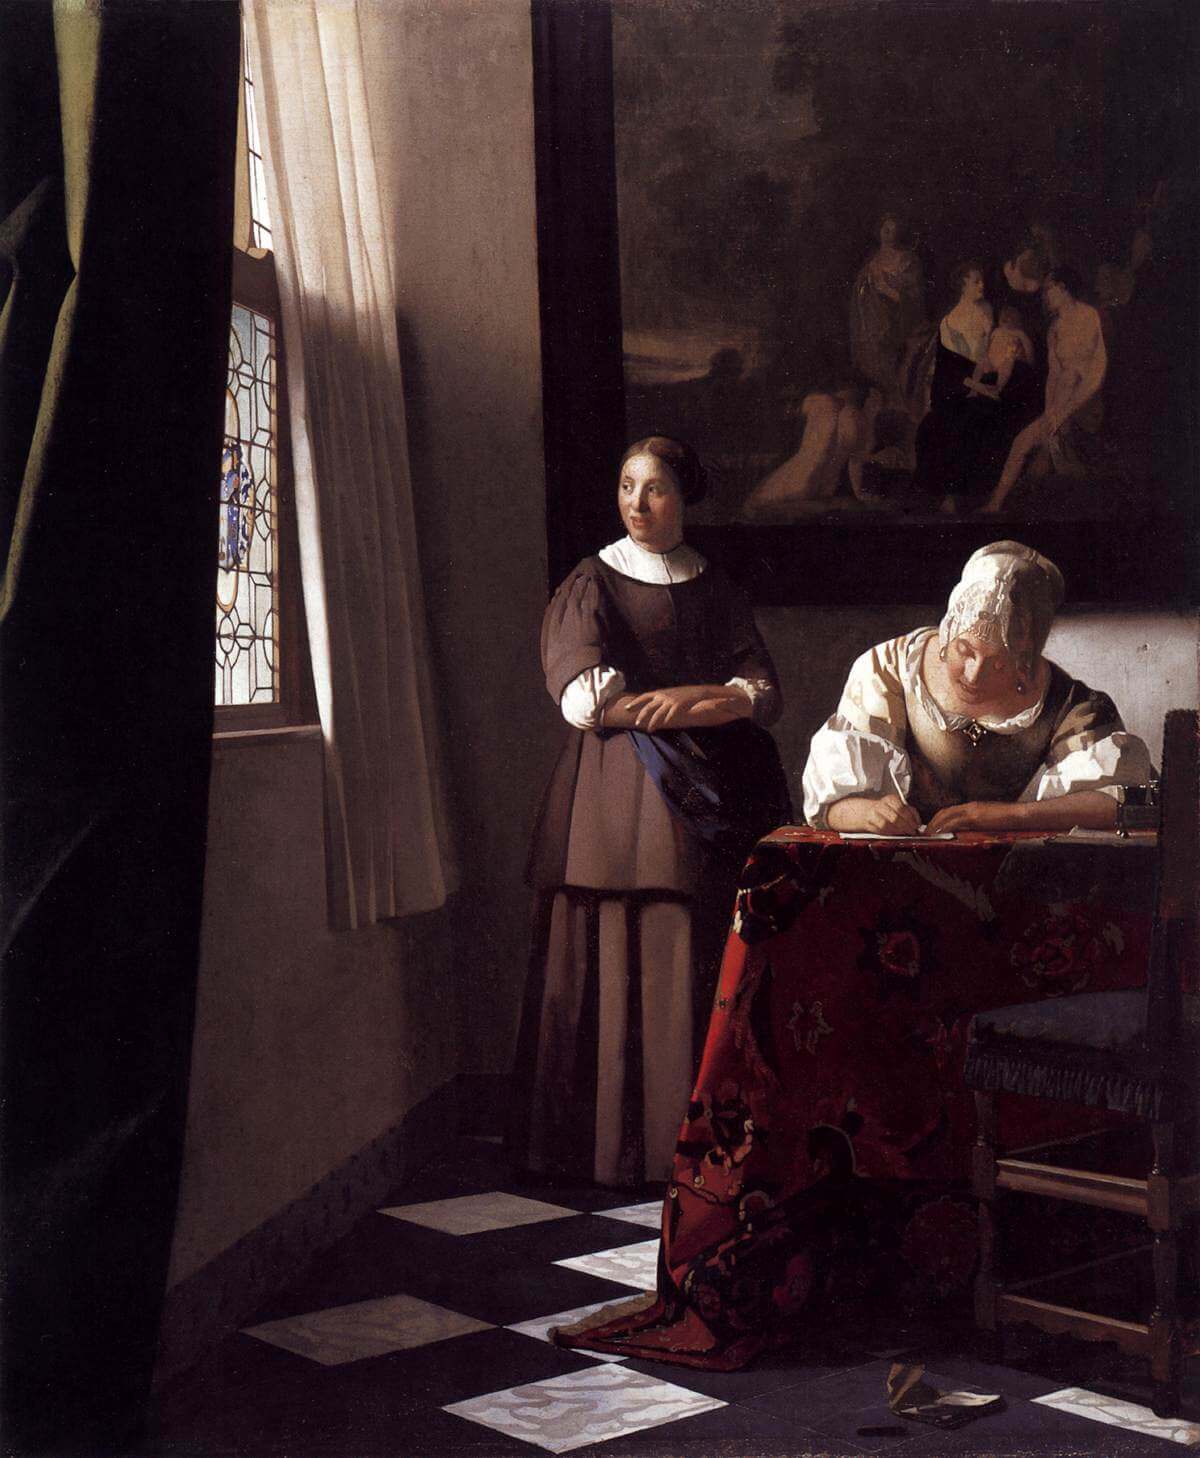 Lady Writing a Letter with Her Maid, 1670 by Johannes Vermeer